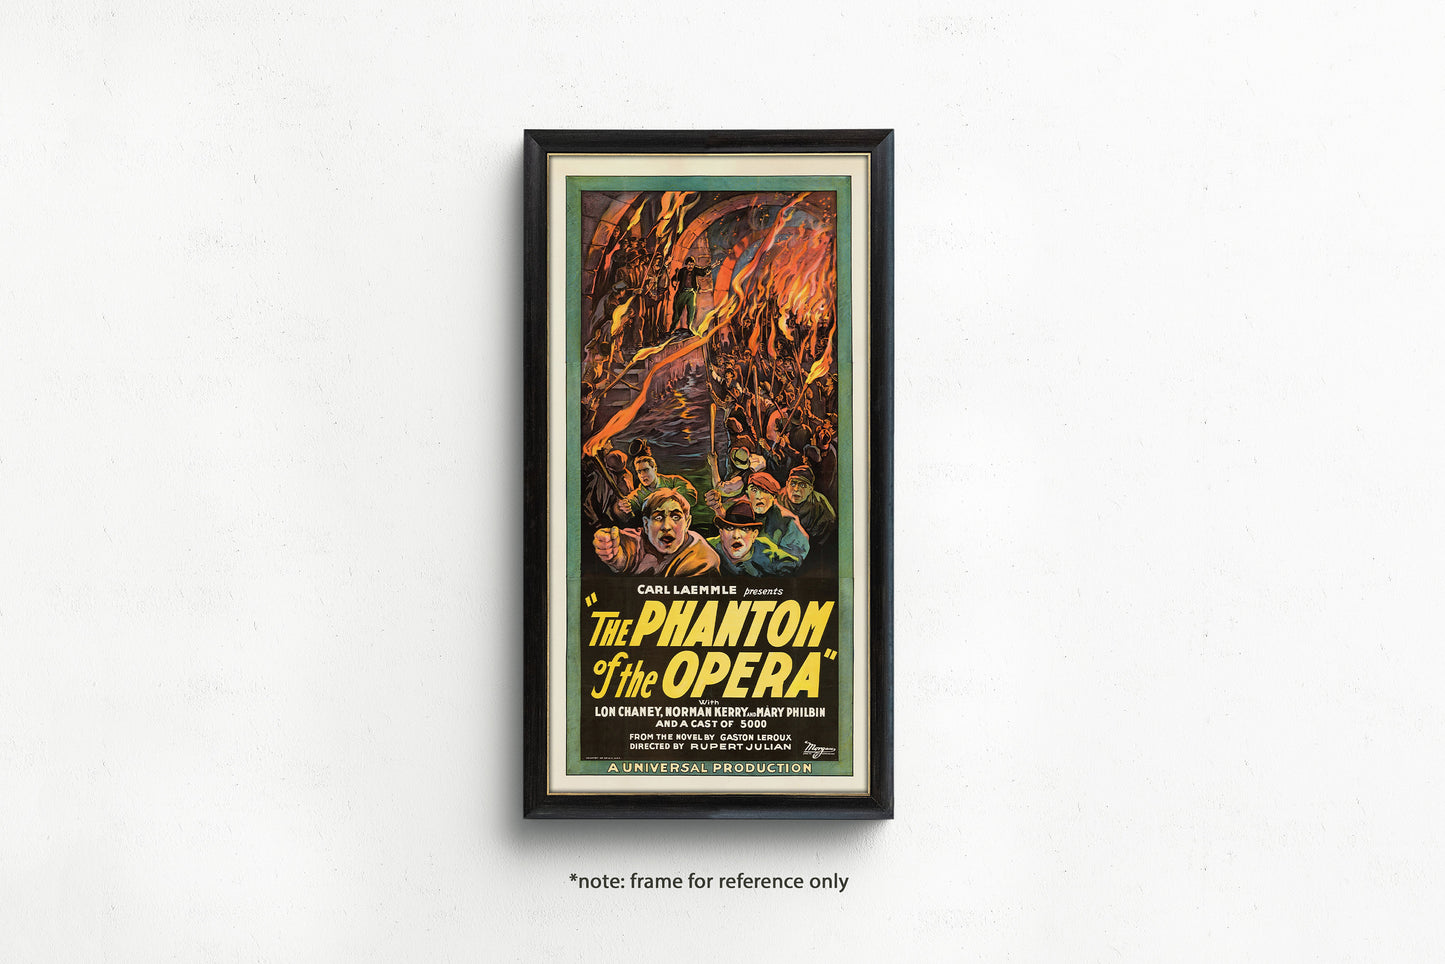 The Phantom of the Opera | Vintage Movie Poster (available framed or unframed)